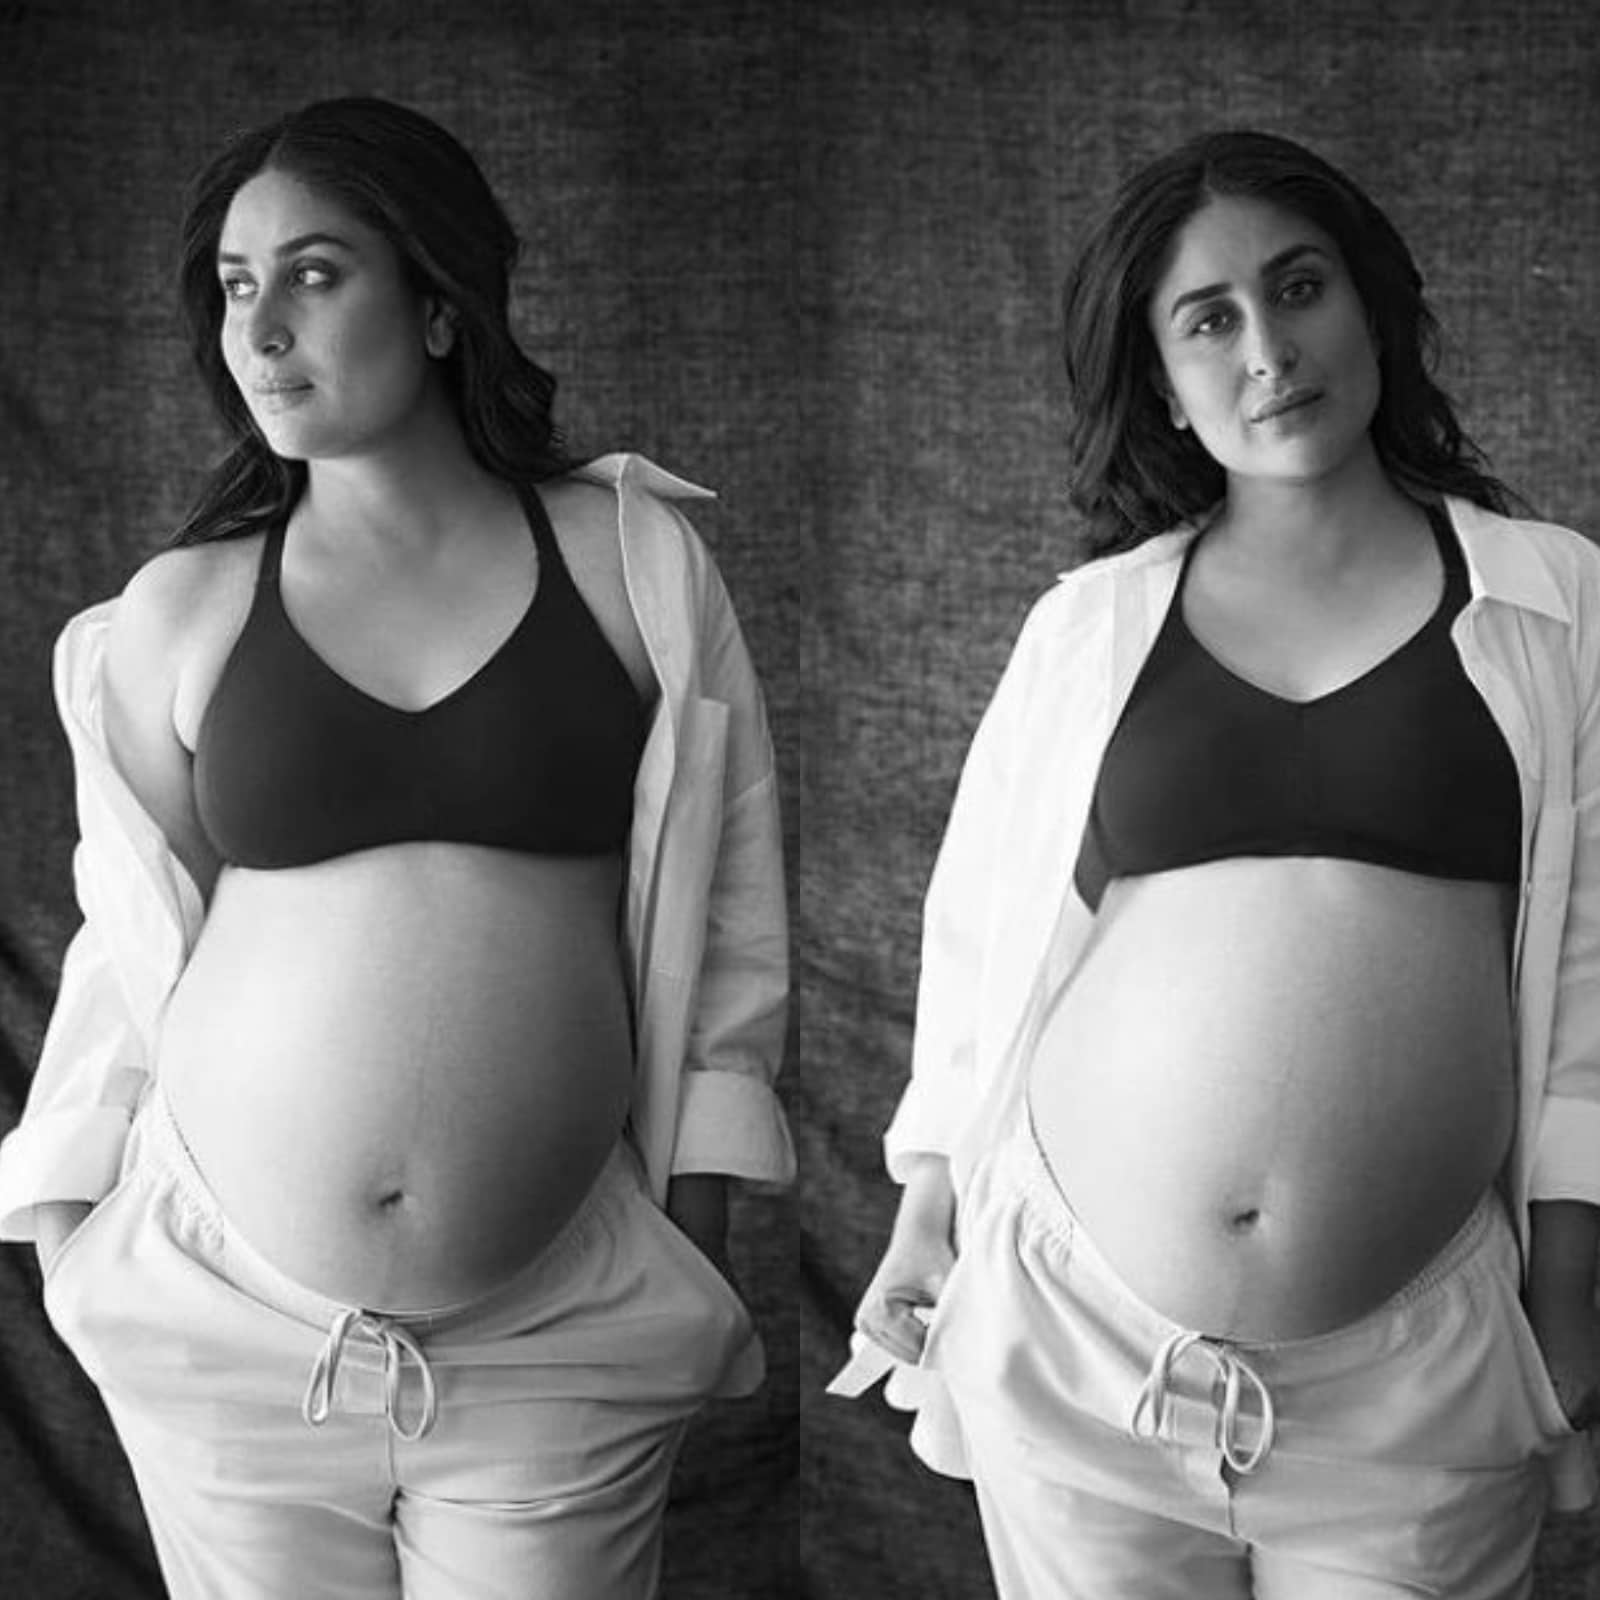 Kareena Kapoor Khan Reveals Why She Wrote About Low Sex Drive During Pregnancy in Her Book